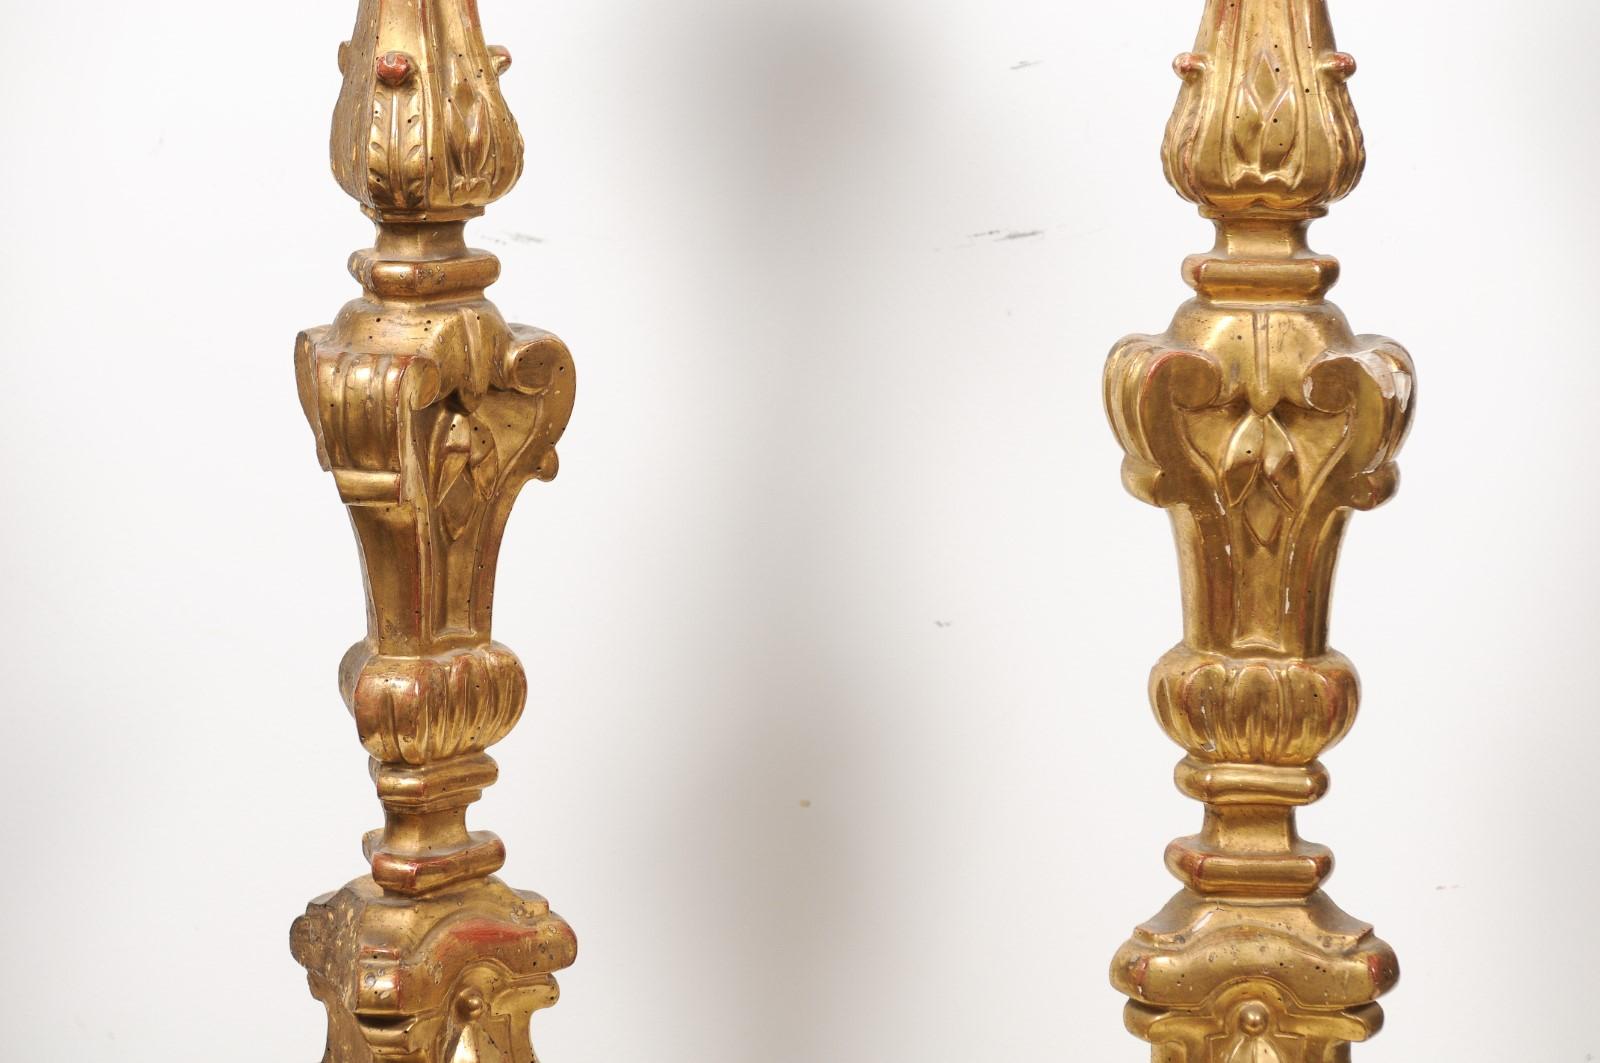 Giltwood Pair of French 19th Century Gilt Candlesticks with Carved Foliage and Volutes For Sale